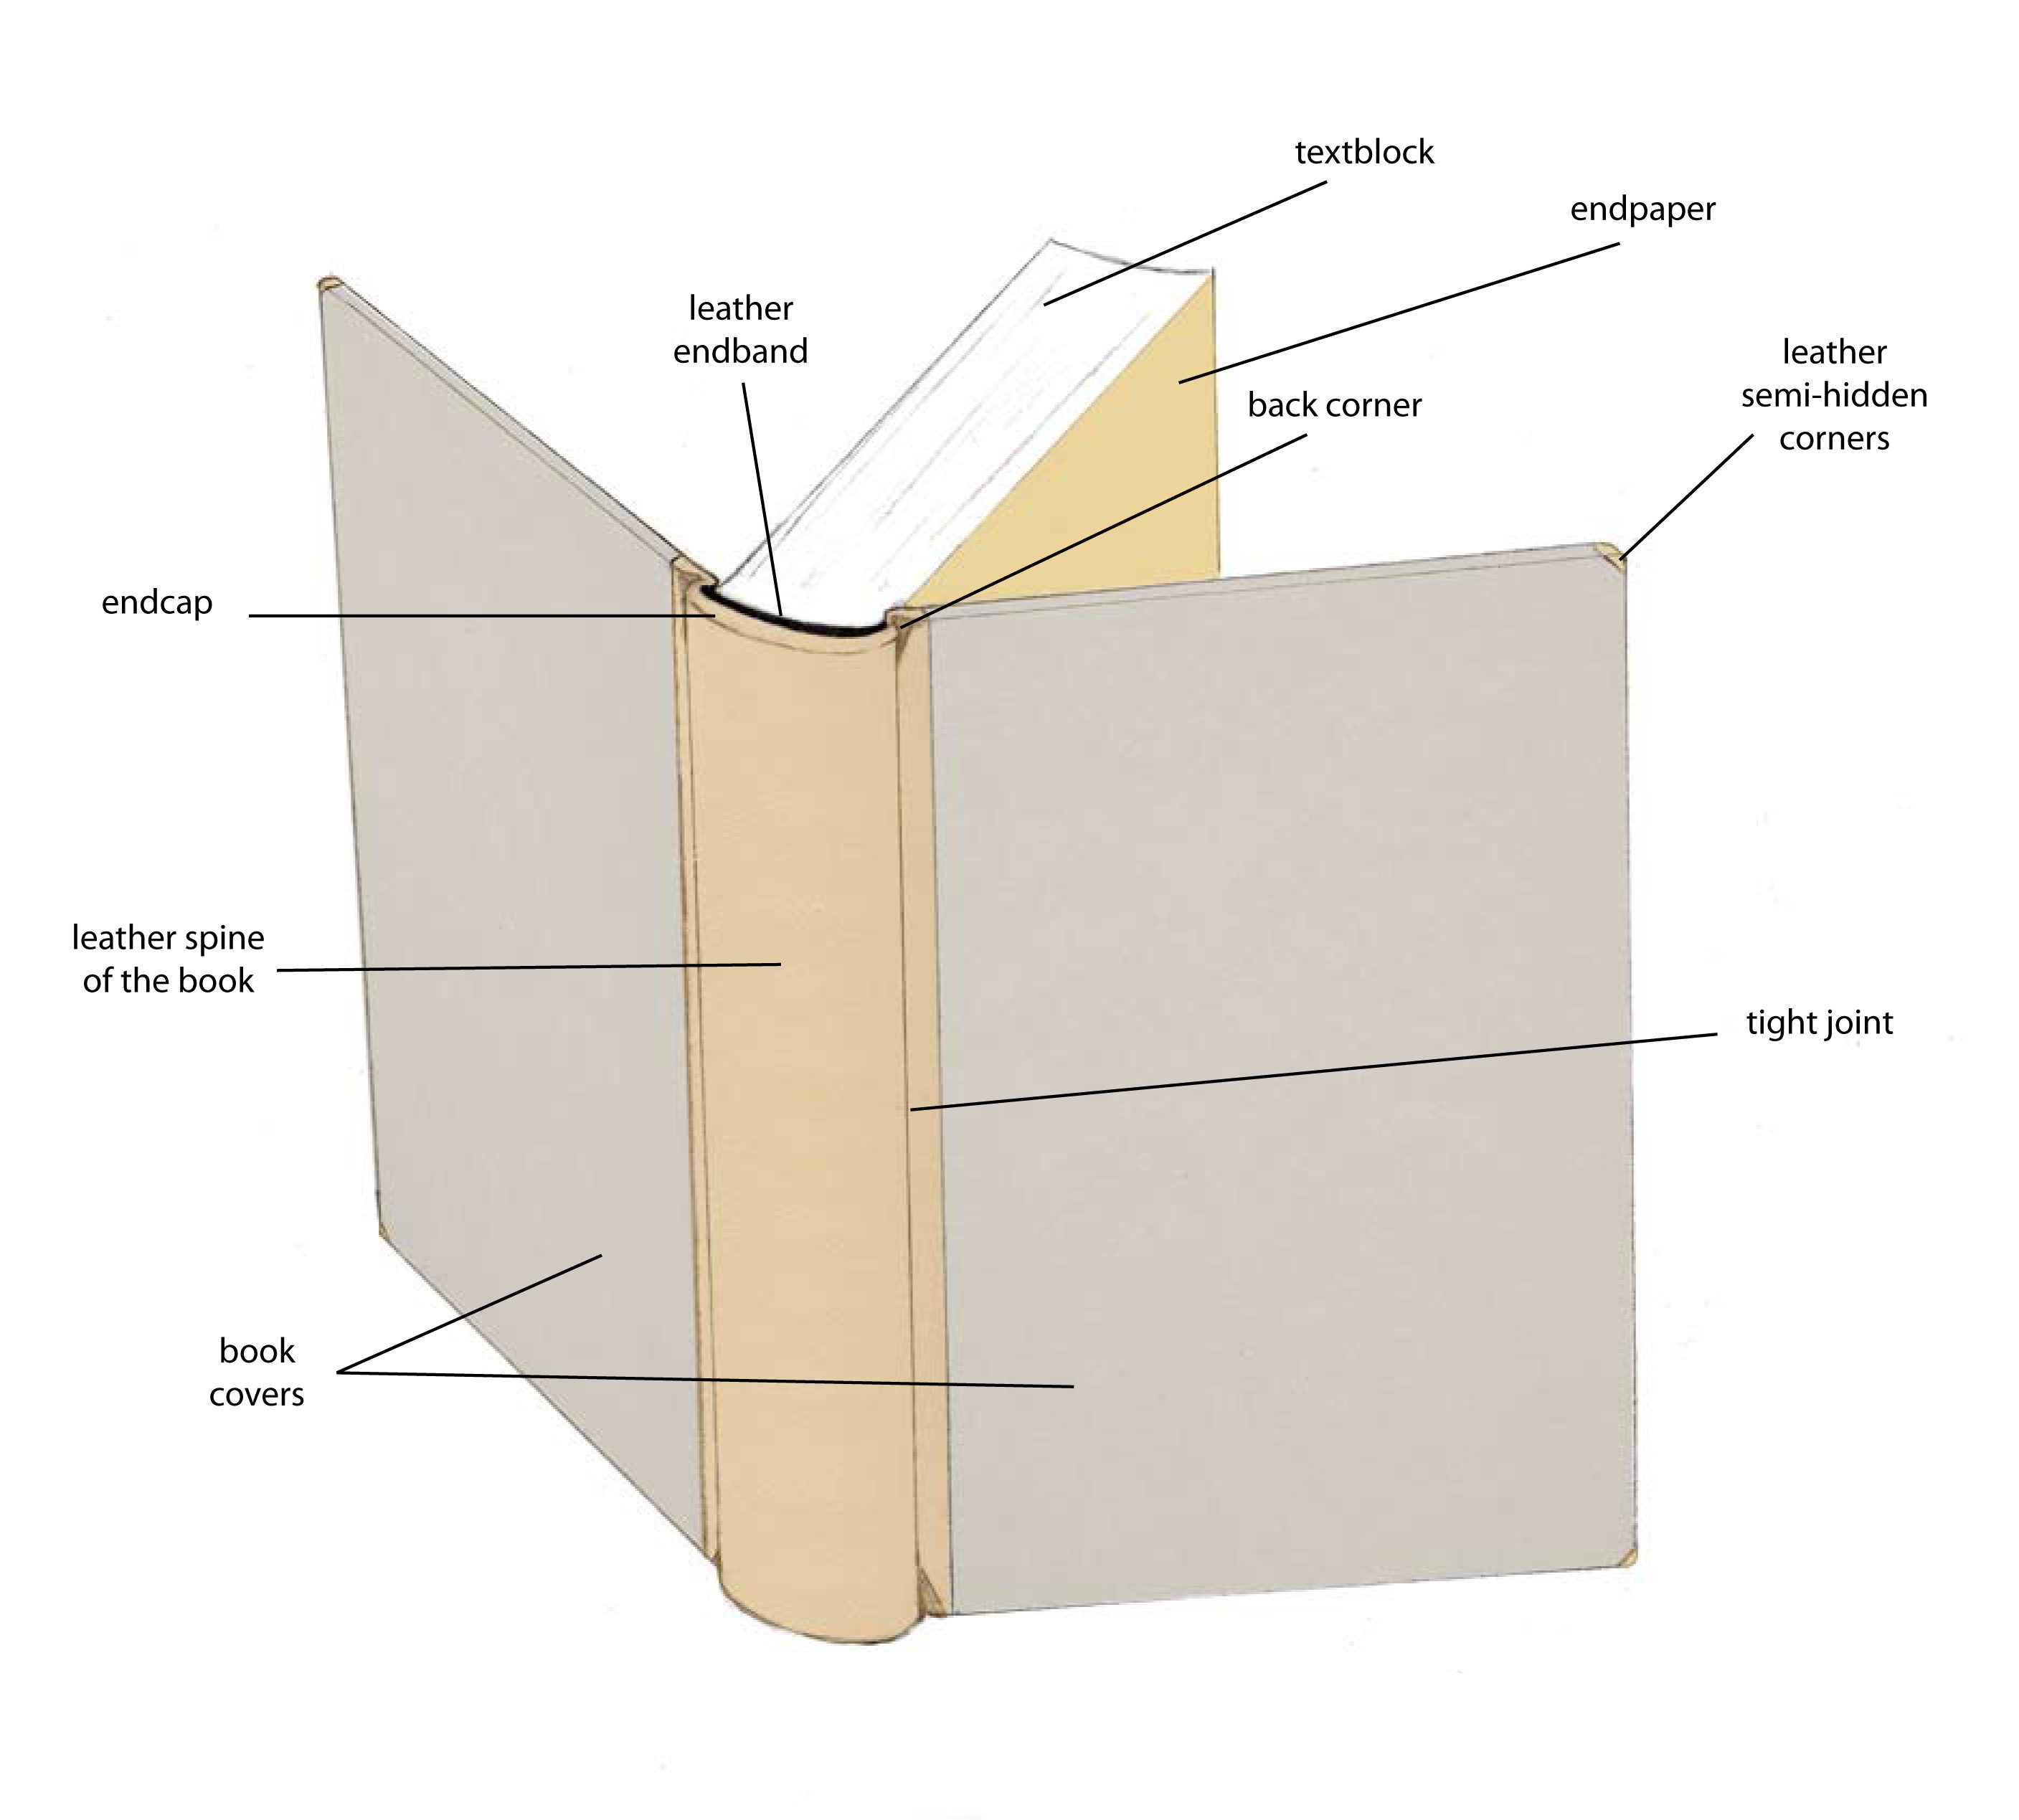 Anatomy of a book